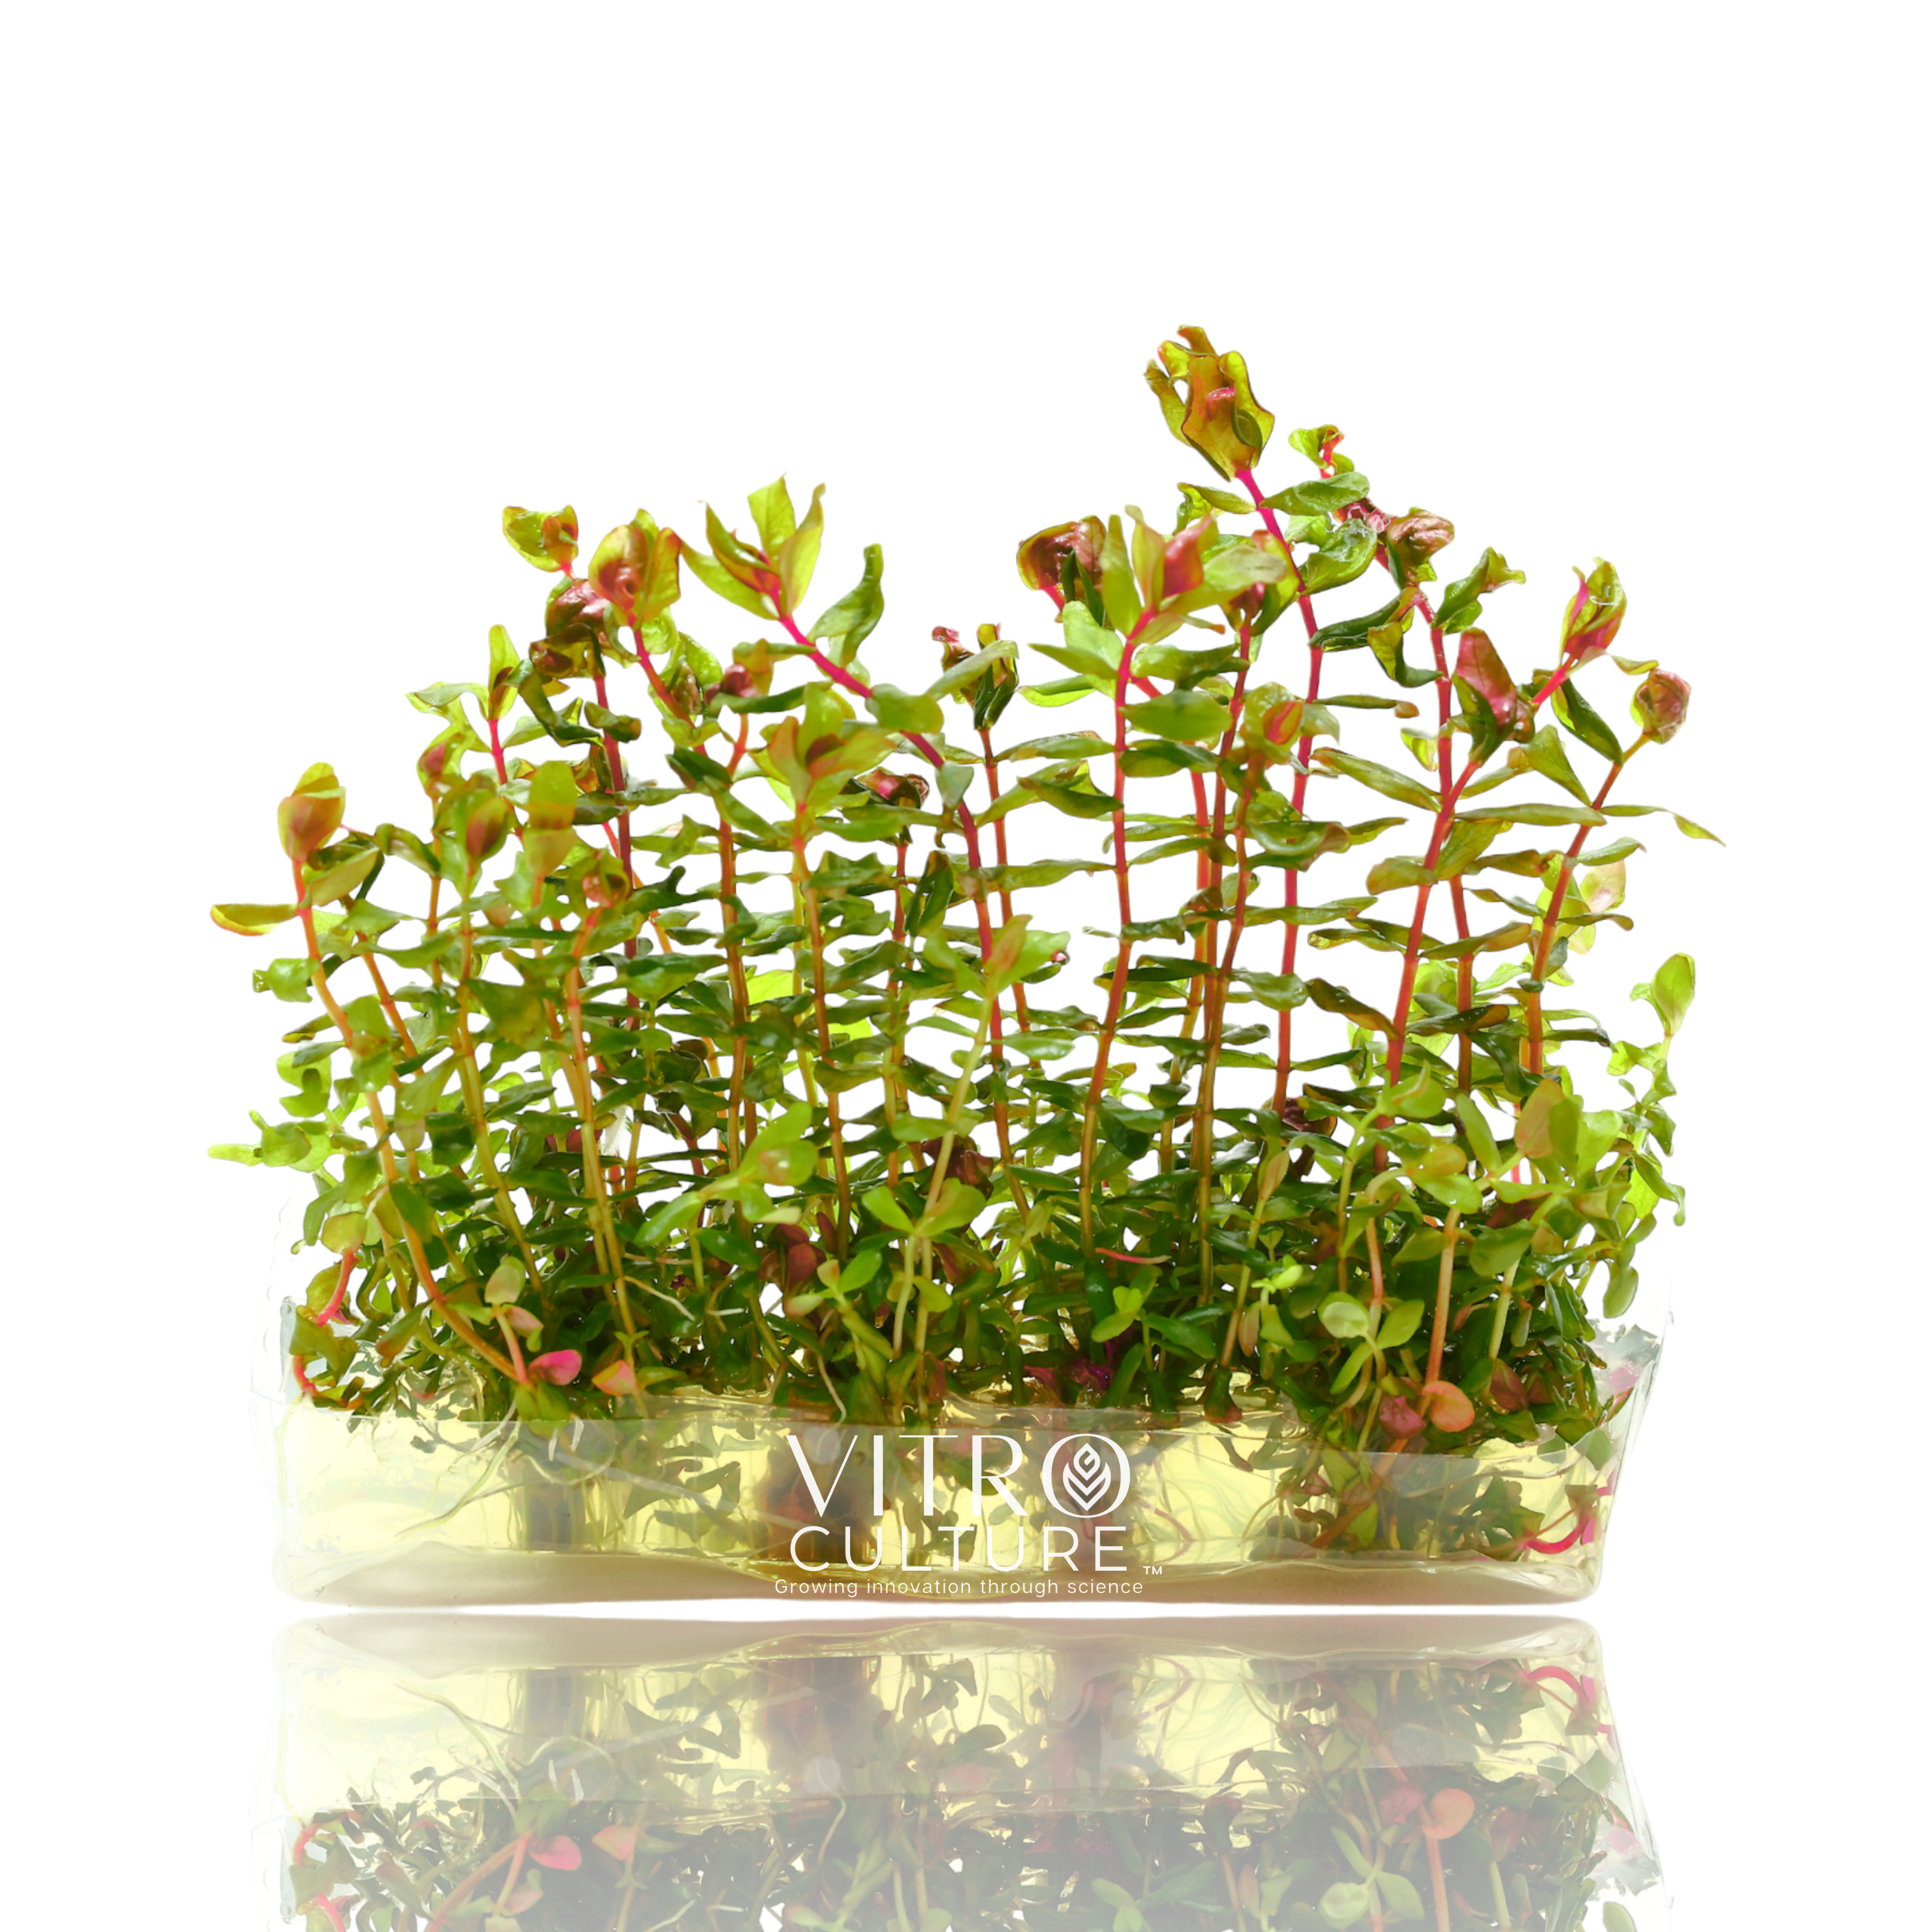 With its striking pink, red color and delicate, beautiful leaves, Rotala macrandra adds a touch of sophistication and elegance to any aquatic environment. This plant is also relatively easy to care for, making it a popular choice for both beginner and experienced plant enthusiasts.